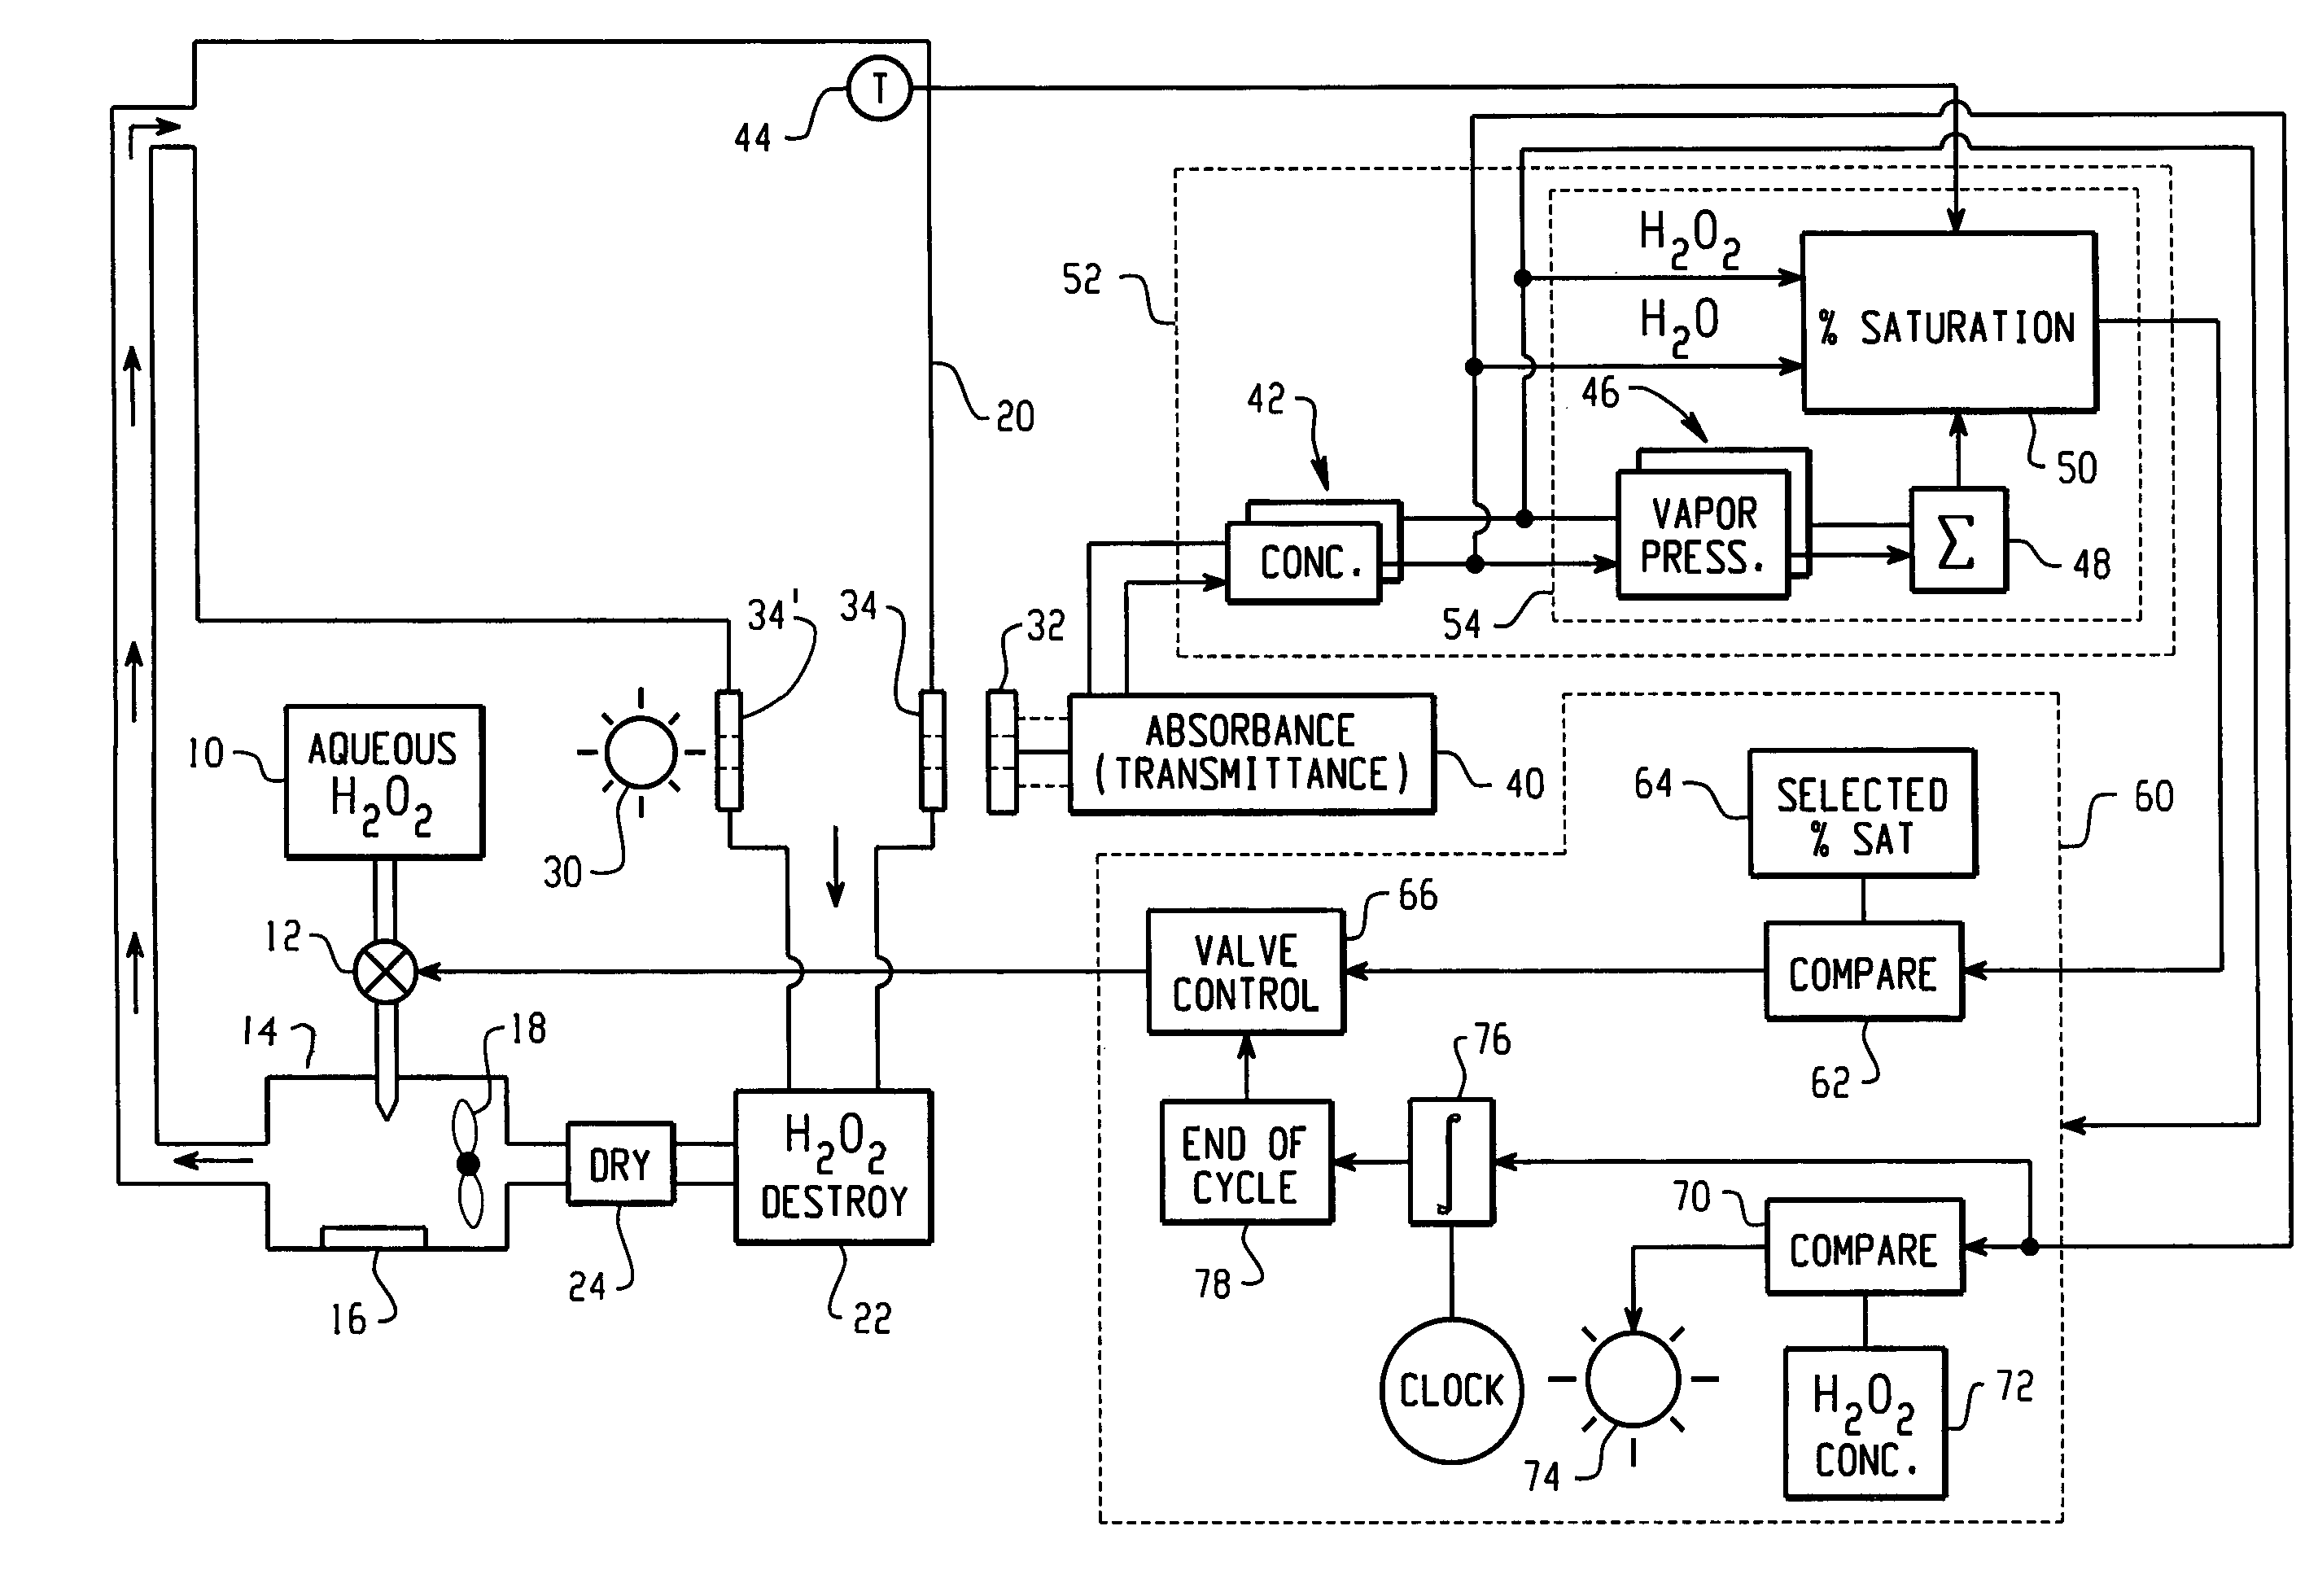 Infrared monitor and control for vapor hydrogen peroxide processing techniques